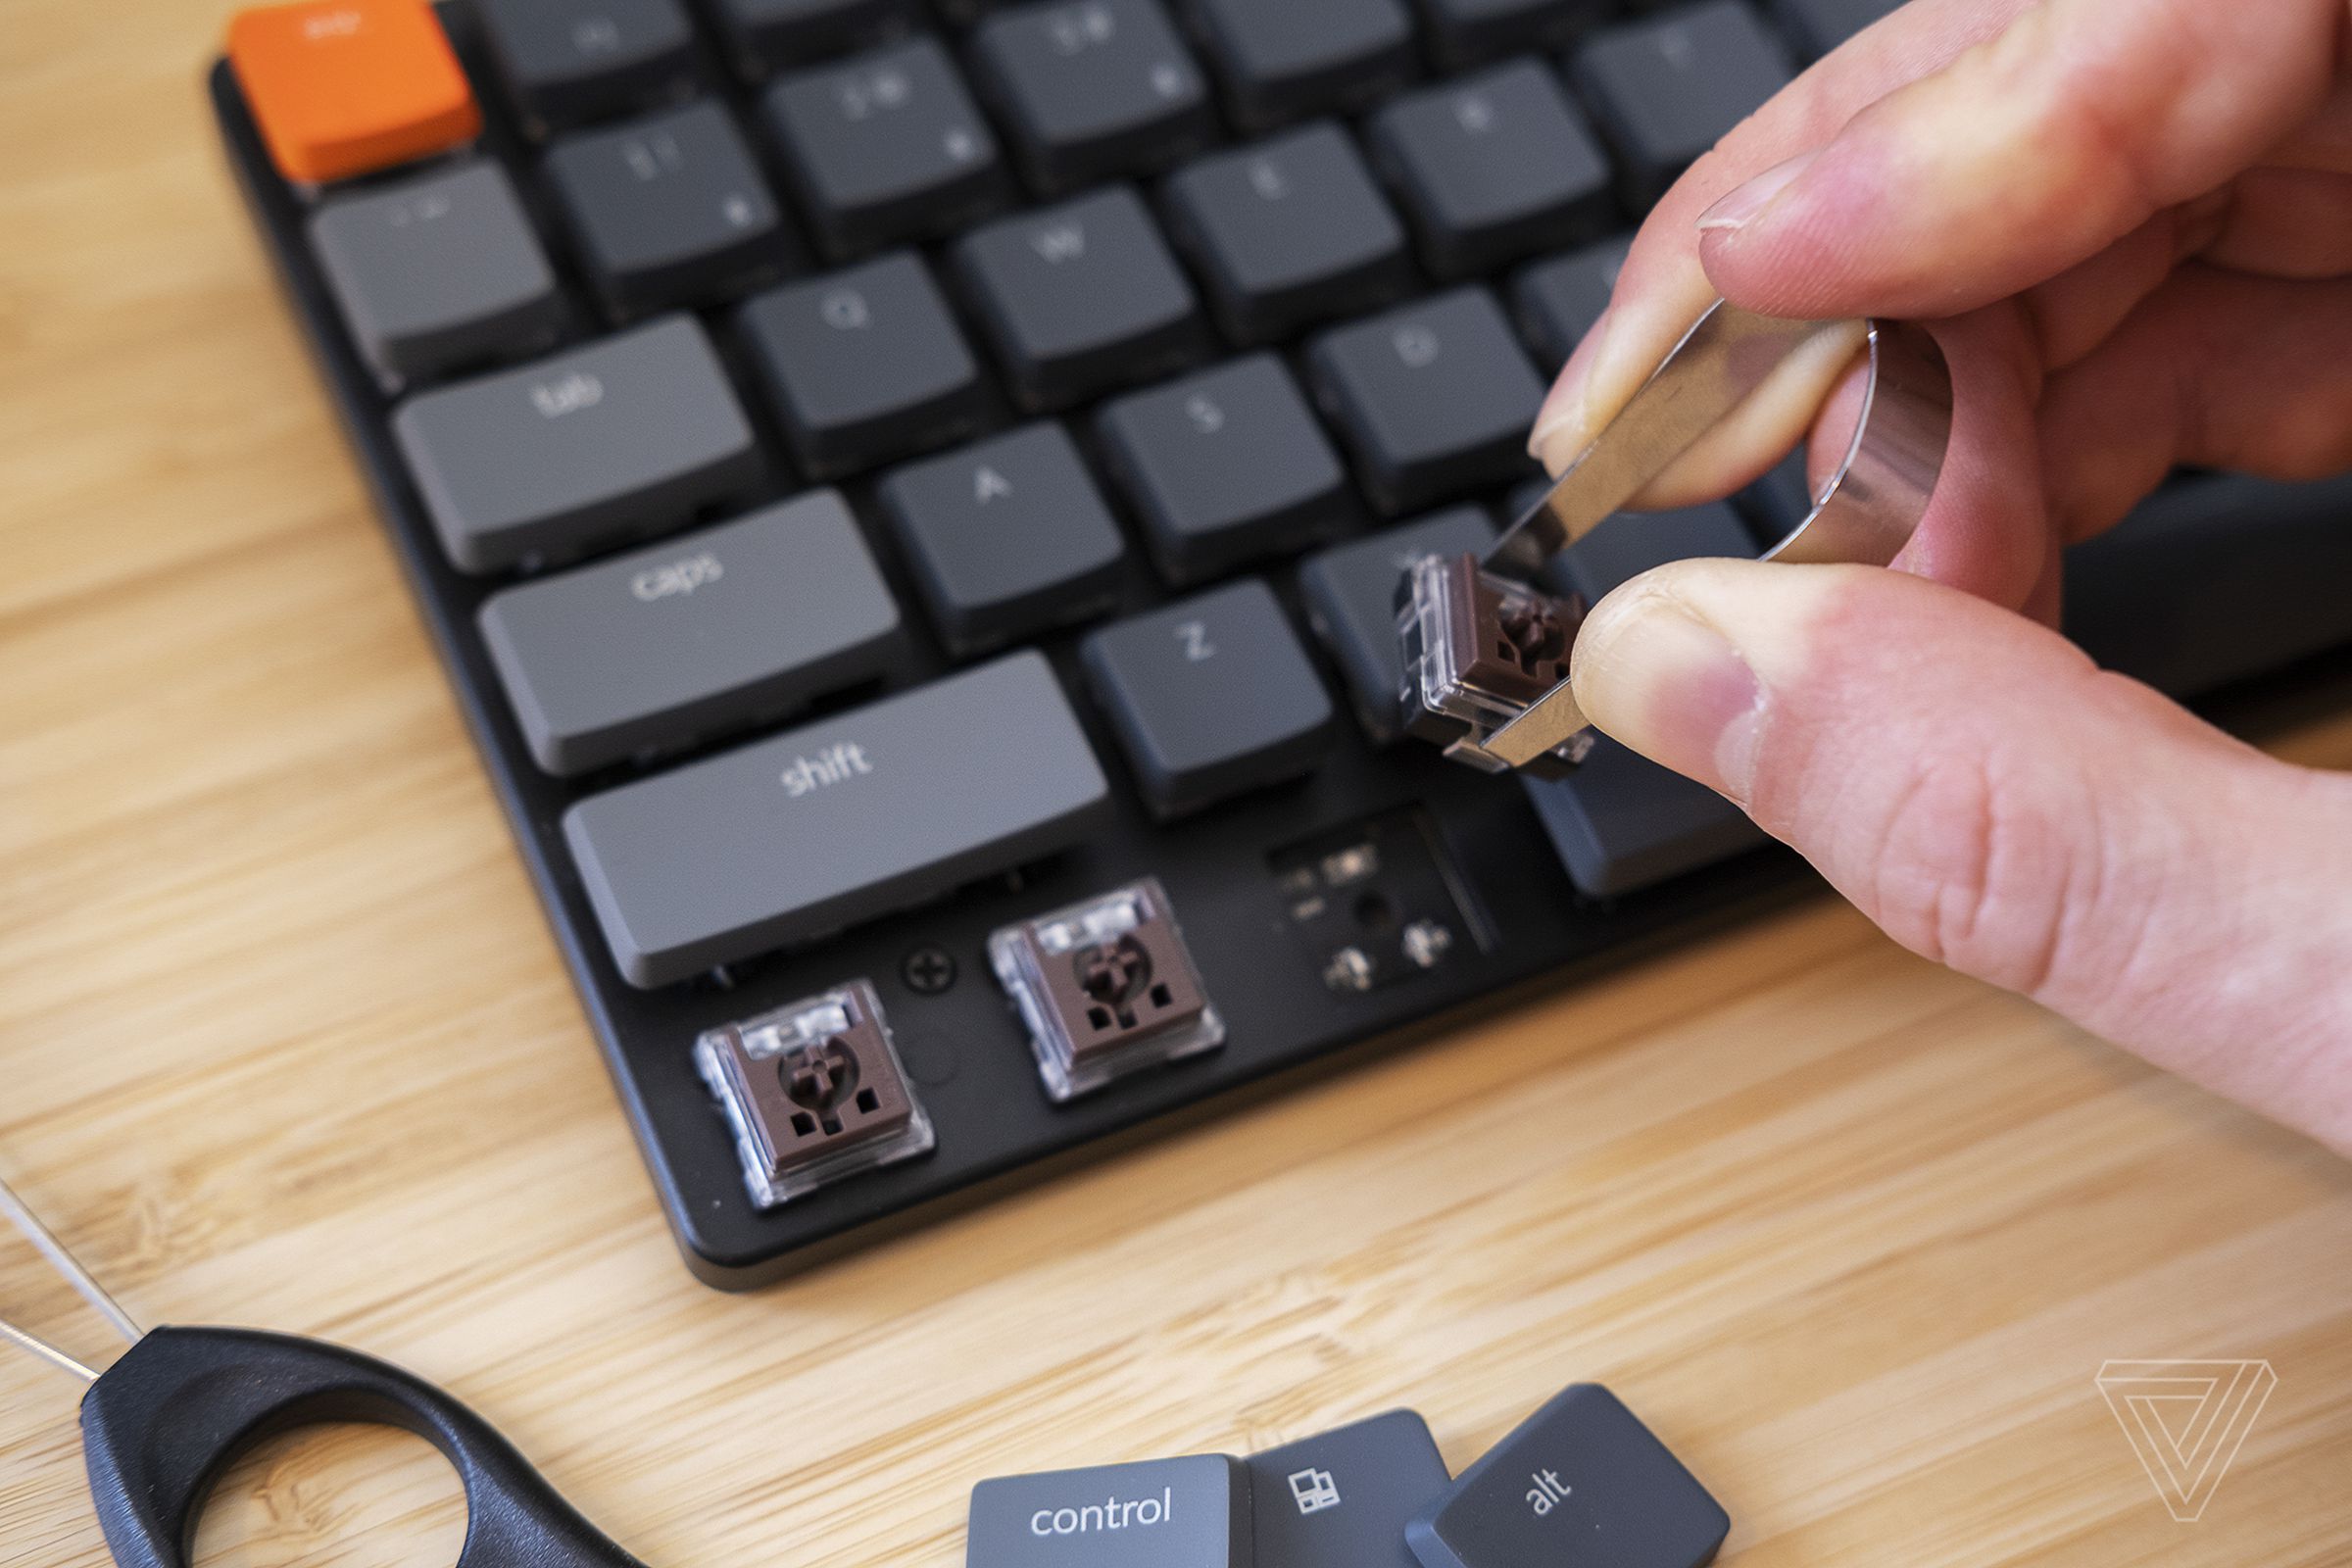 Swapping the keyboard’s switches is relatively simple.